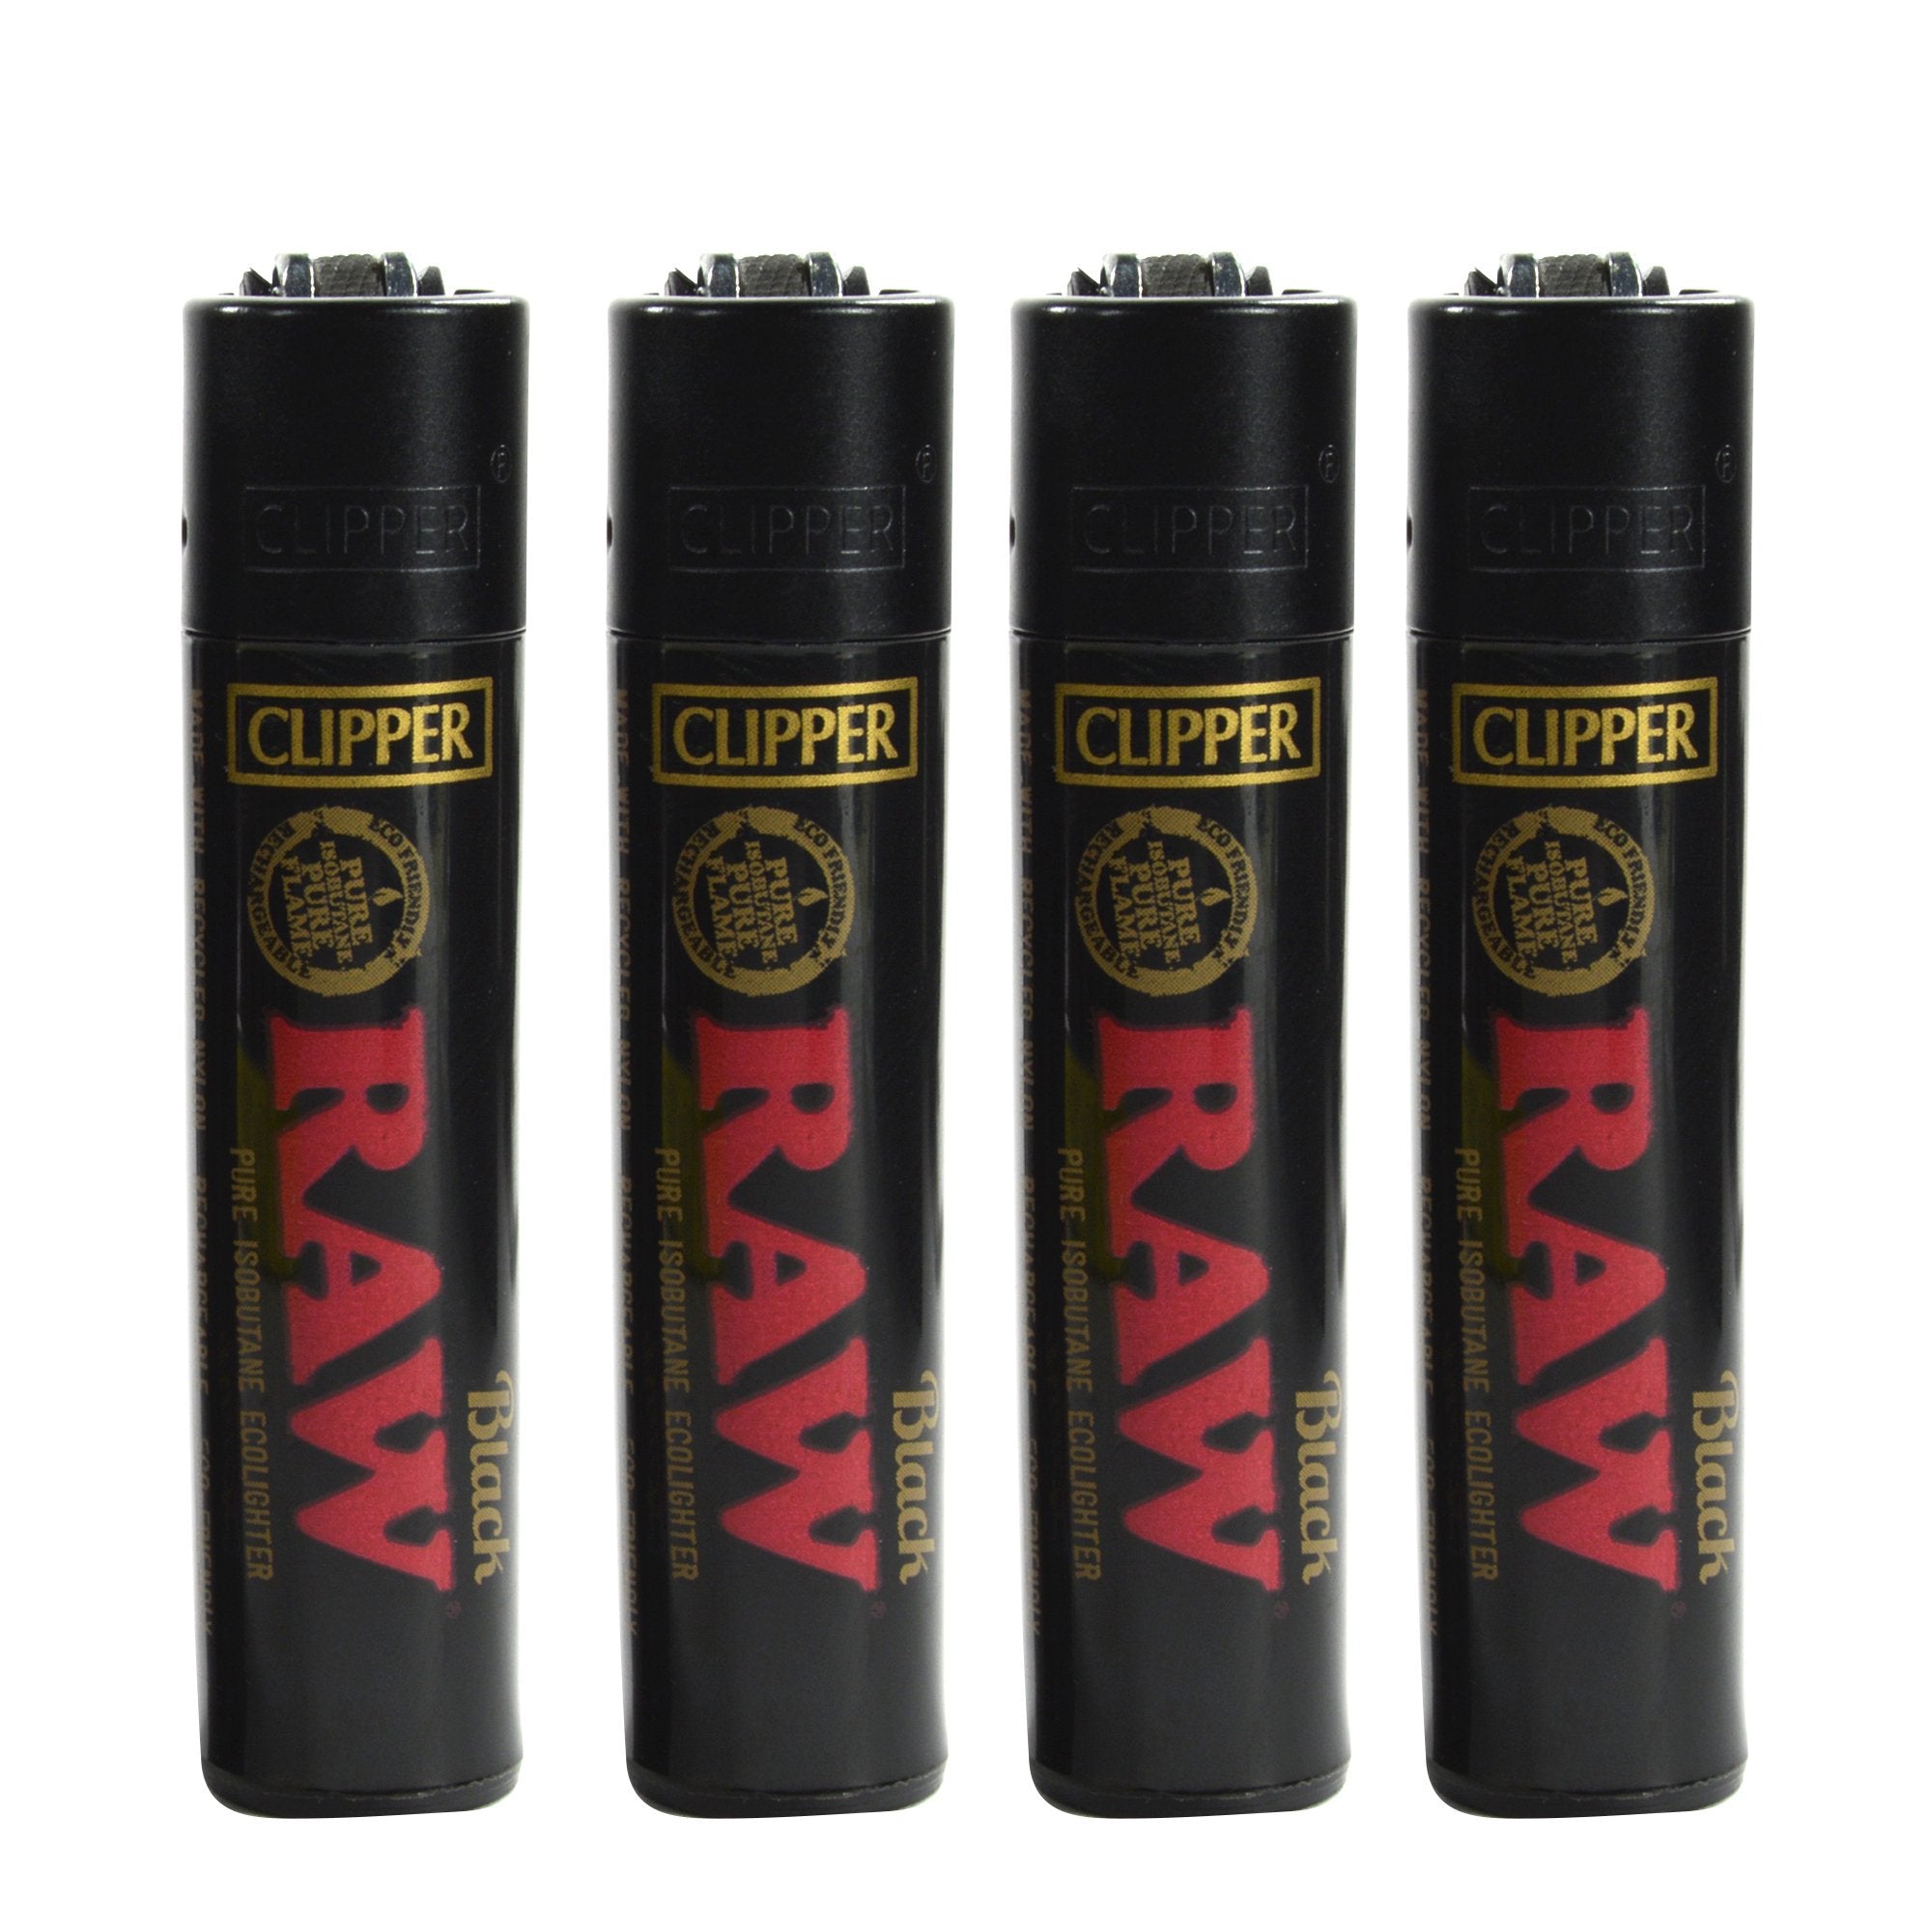 CLIPPER | 'Retail Display' Lighter RAW Logo Black & Gold - 48 Count - 4